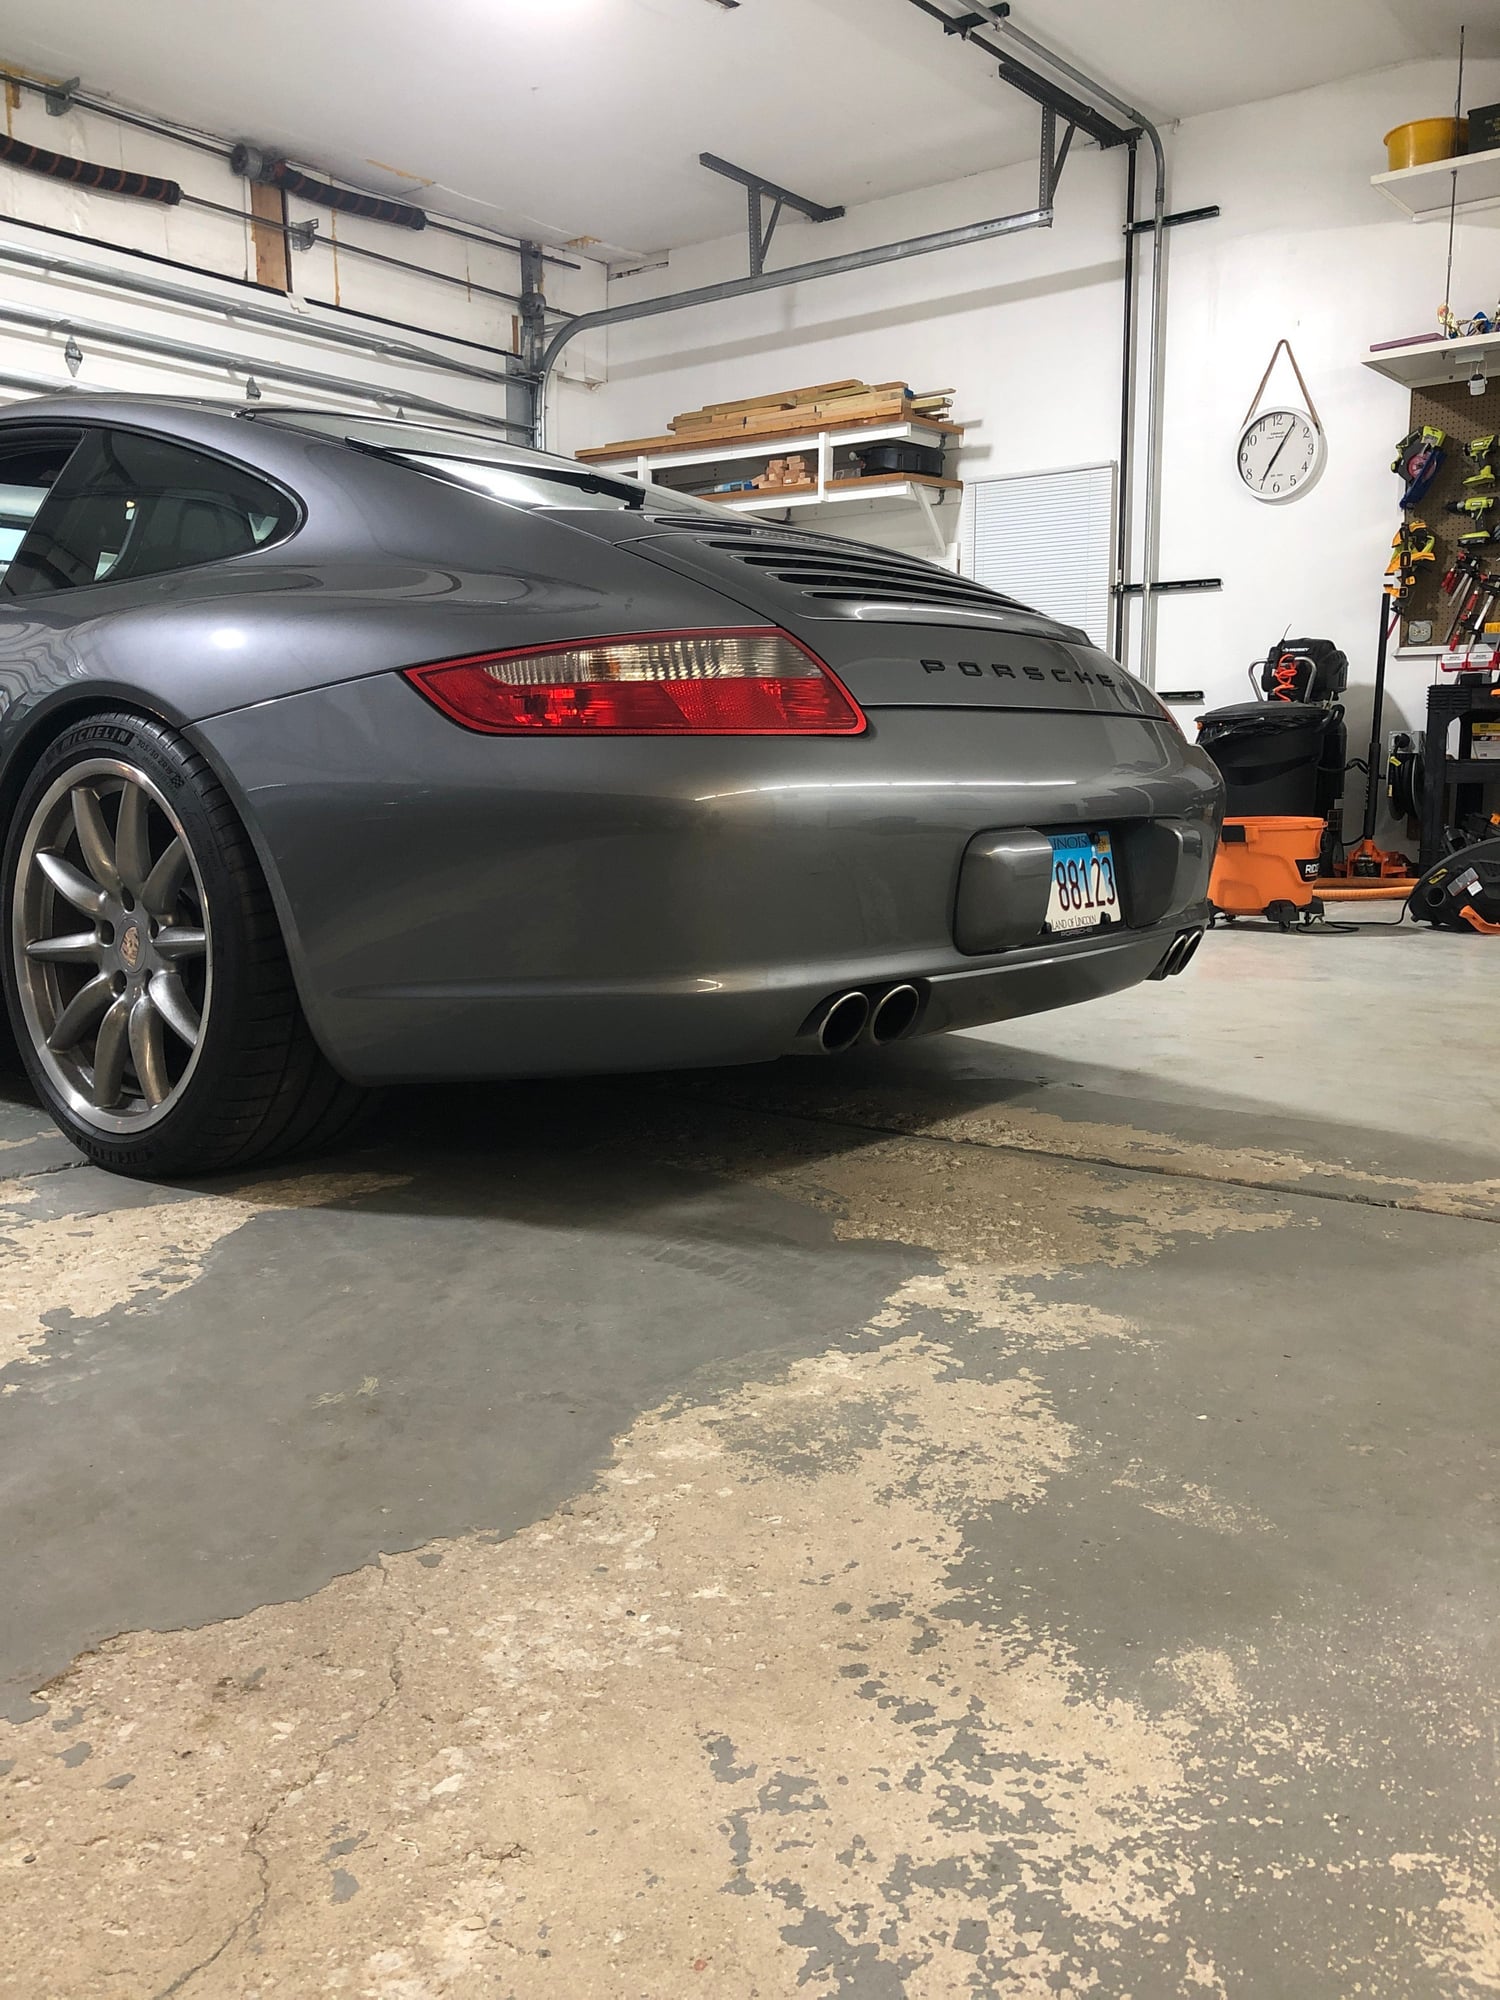 2006 Porsche 911 - 2006 Carrera S Seal Grey - Used - VIN WP0AB29976S742288 - 88,918 Miles - 6 cyl - 2WD - Manual - Coupe - Gray - Downers Grove, IL 60516, United States